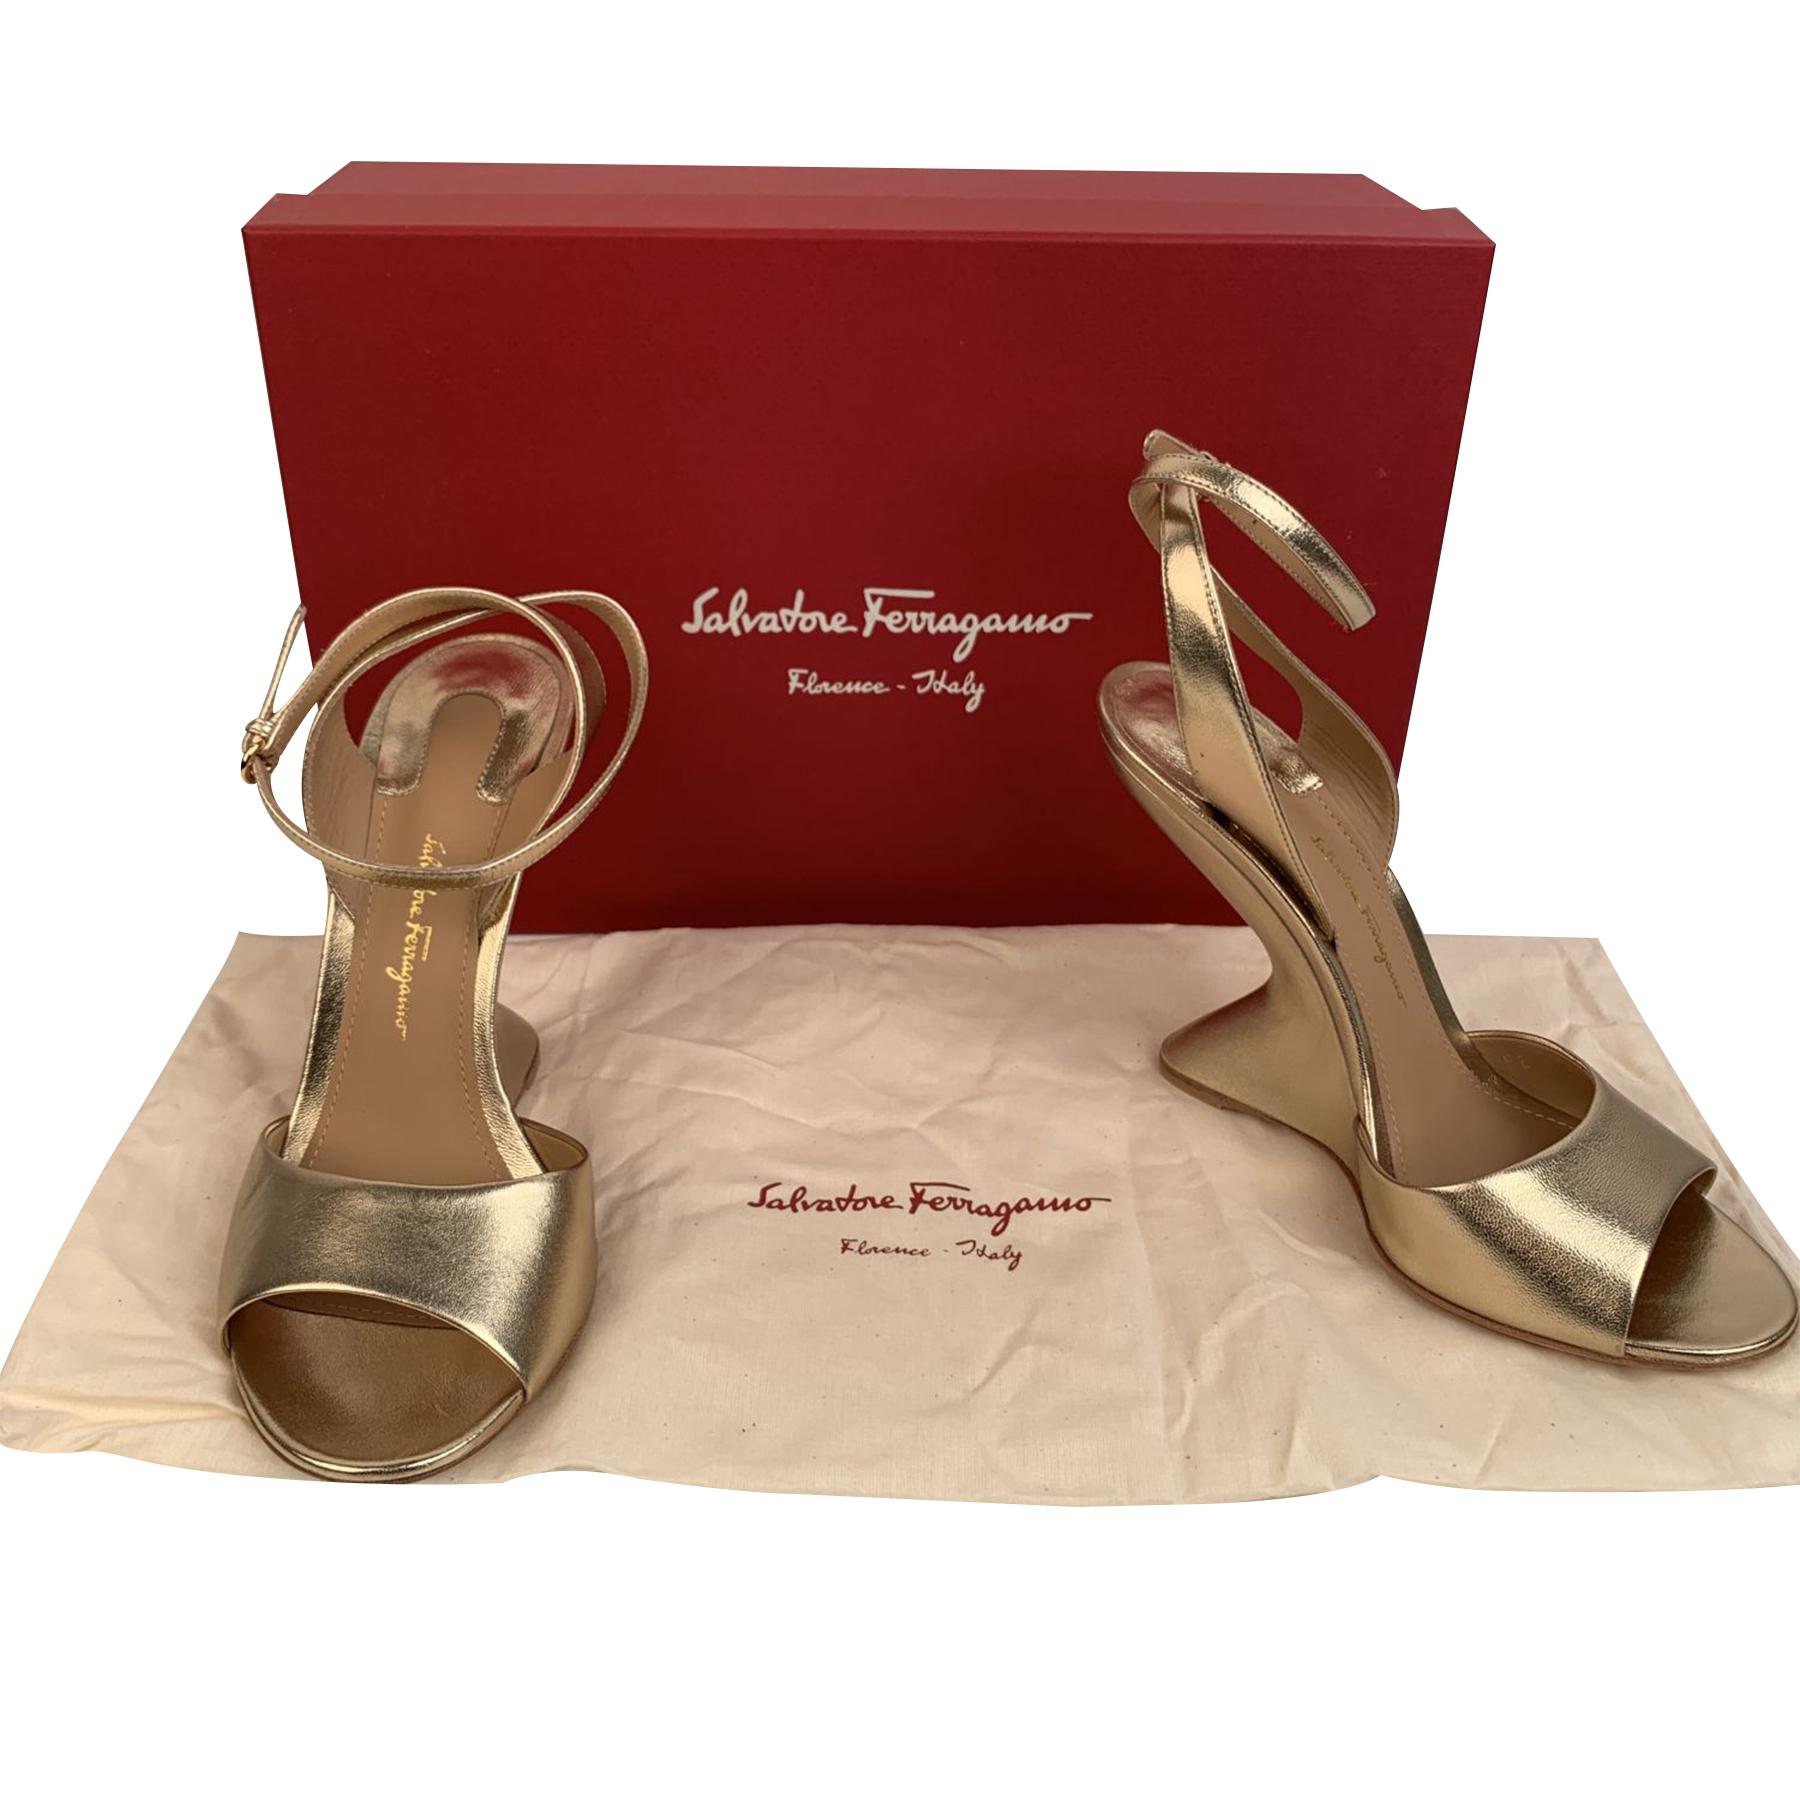 Elegant Salvatore Ferragamo 'Arsina 105' wedge sandals. Crafted in gold metal leather. They feature open toe, high sculpted wedge heel and ankle strap with adjustable buckle. Made in Italy. Heels Height: 4.1 inches - 10.5 cm. Size: US 7.5 C - EU 38